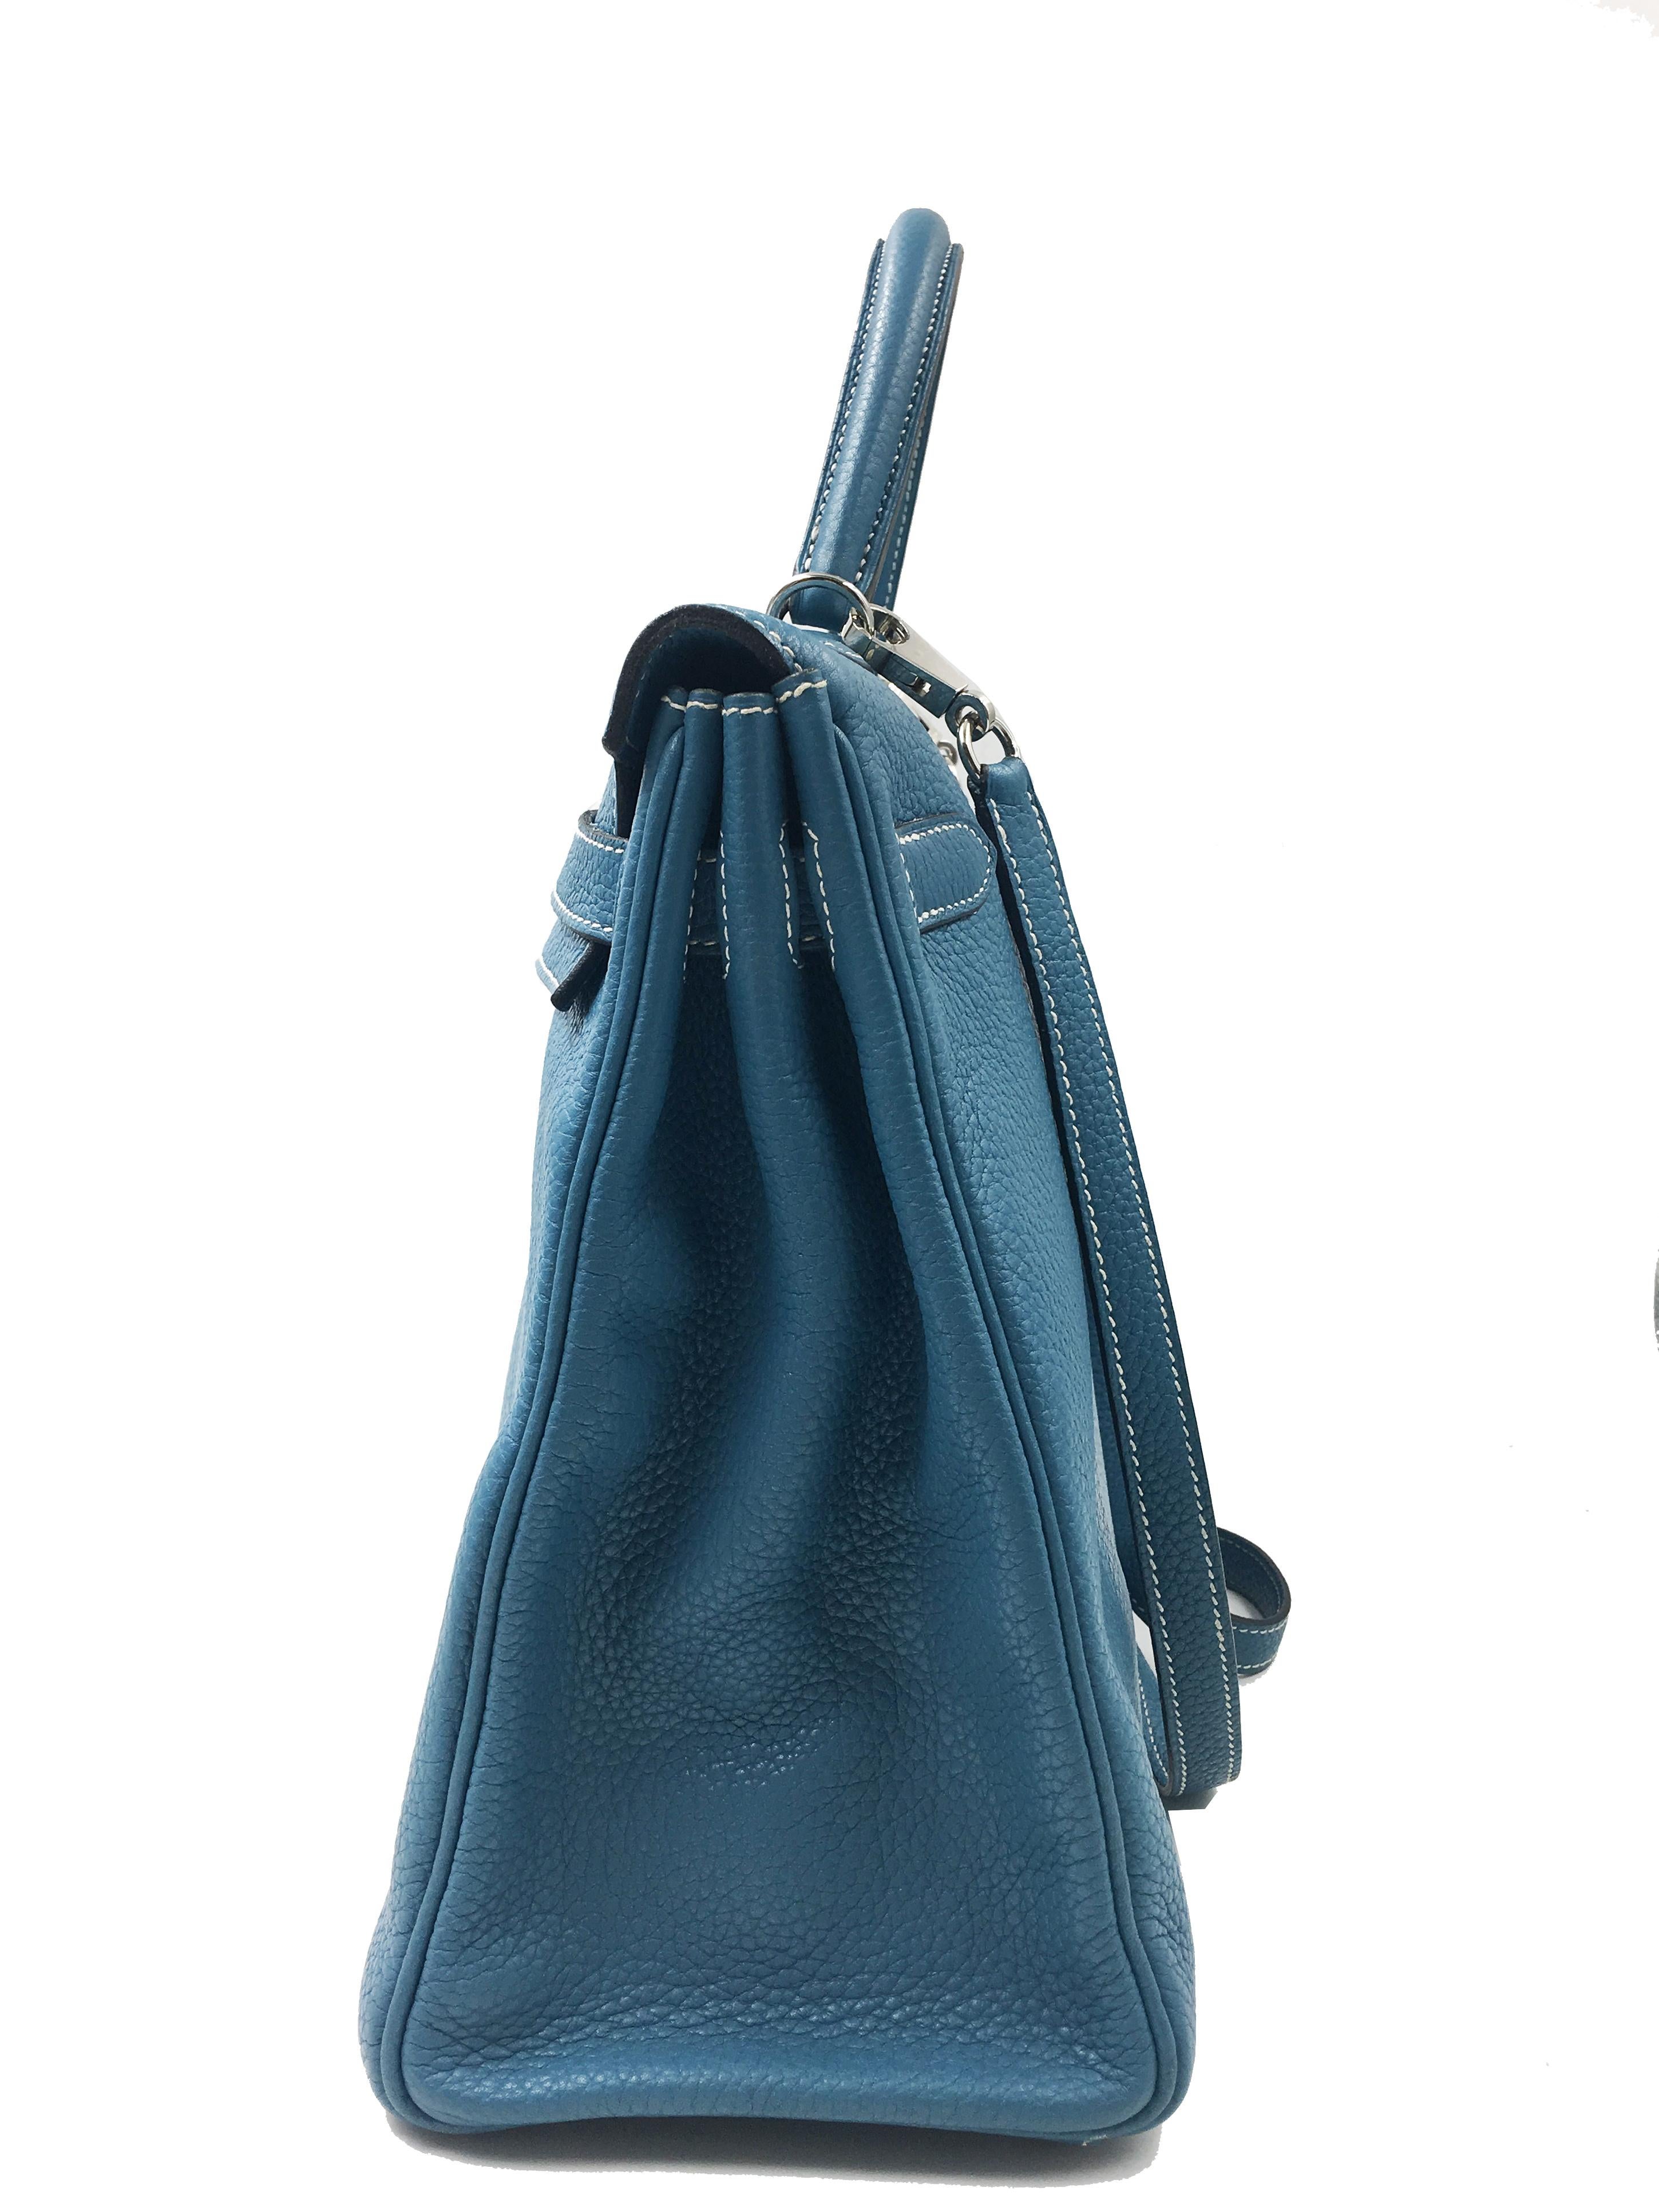 Hermès Kelly Blue Jean 32cm Azur Togo Leather Shoulder Bag In Good Condition For Sale In New York, NY